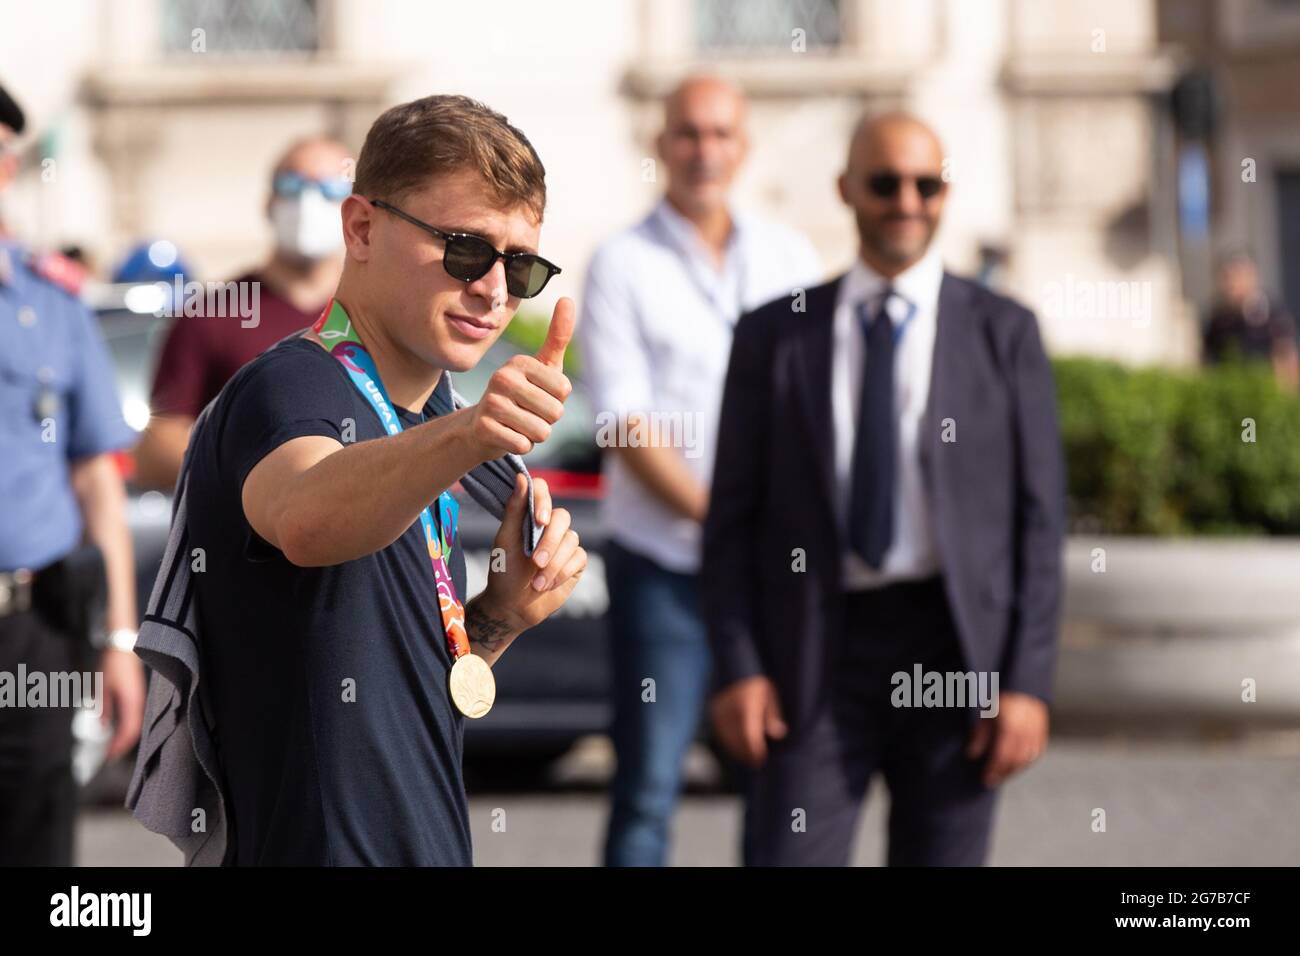 Rome, Italy. 12th July, 2021. Niccolò Barellathe player of the Italian National Football Team enter the Quirinal Palace in Rome to visit the President of the Republic Sergio Mattarella after the victory of the European Football Championships, raising the cup won to the sky. The Italian tennis player Matteo Berrettini, finalist at the Wimbledon tournament, also attended the ceremony (Photo by Matteo Nardone/Pacific Press/Sipa USA) Credit: Sipa USA/Alamy Live News Stock Photo